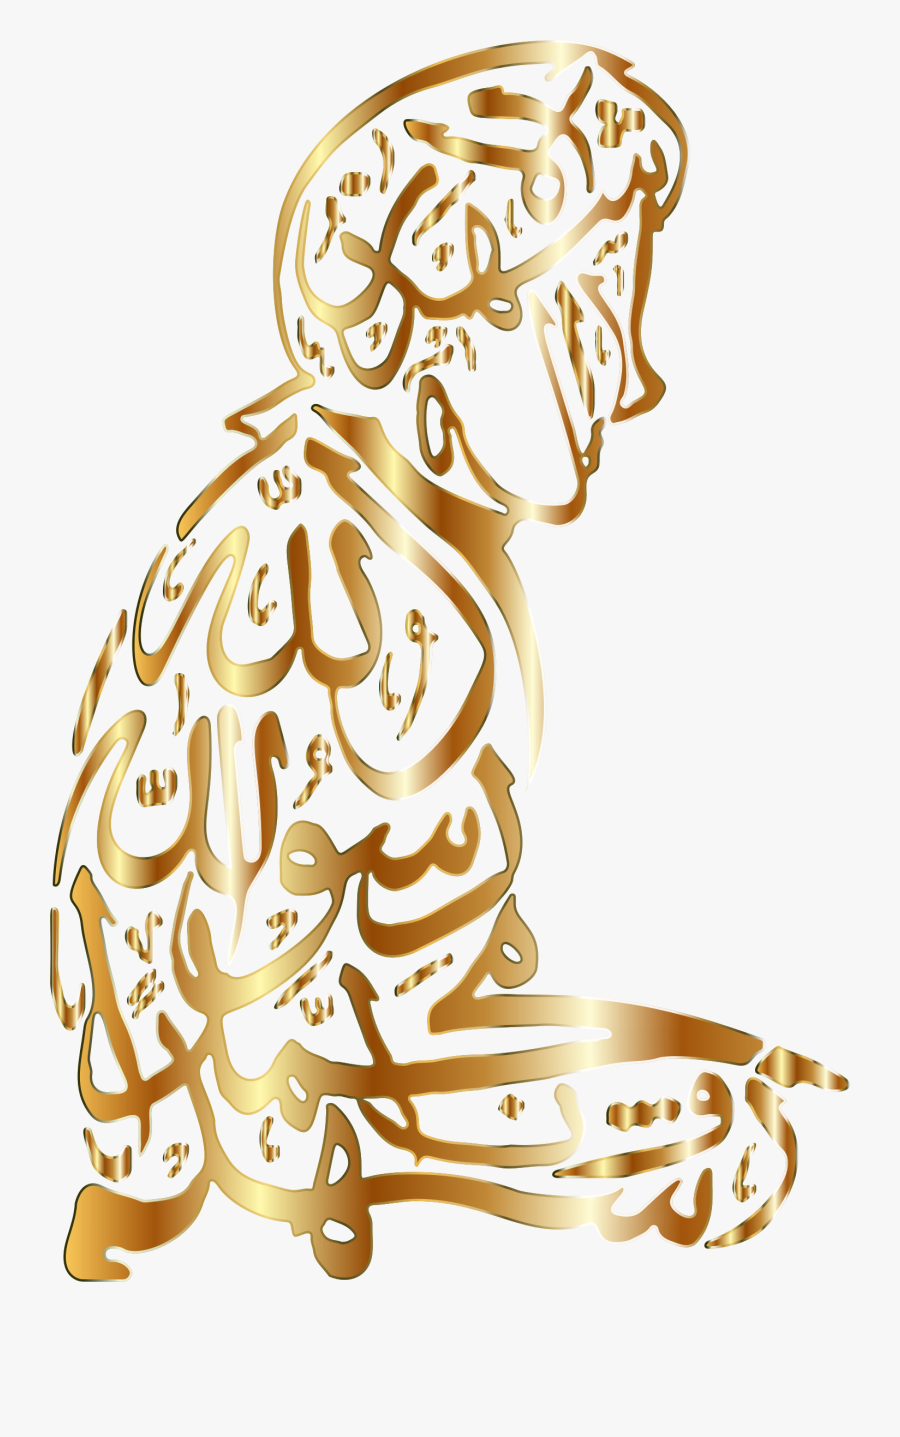 Gold Shahada Salat Calligraphy No Background Clip Arts - Know If Your Ramadan Is Accepted, Transparent Clipart